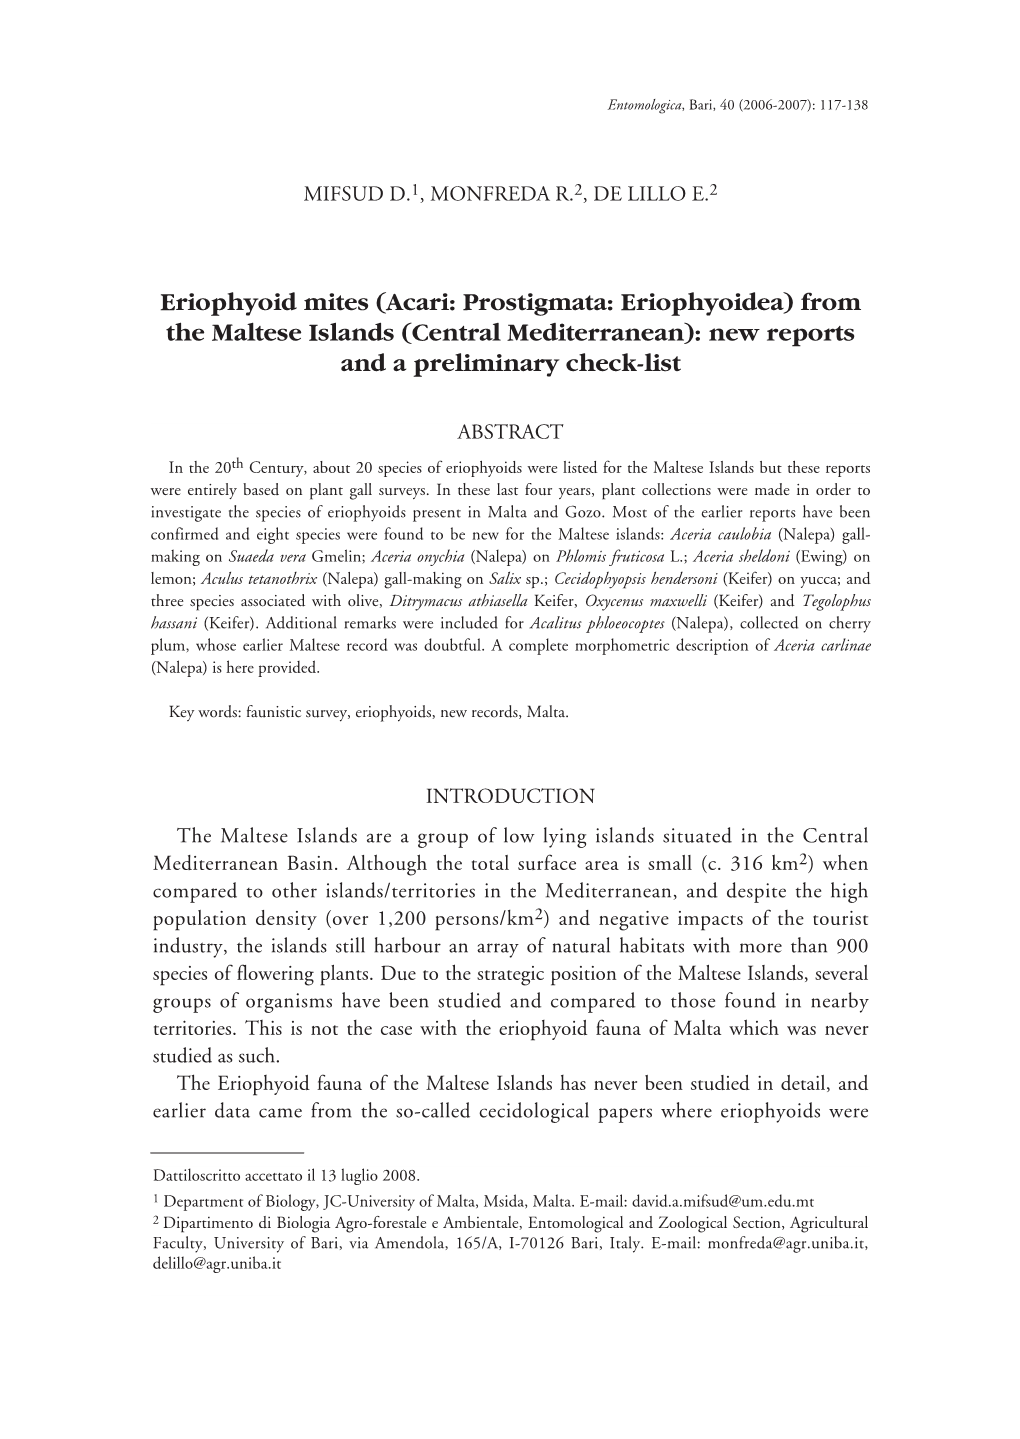 Eriophyoid Mites (Acari: Prostigmata: Eriophyoidea) from the Maltese Islands (Central Mediterranean): New Reports and a Preliminary Check-List